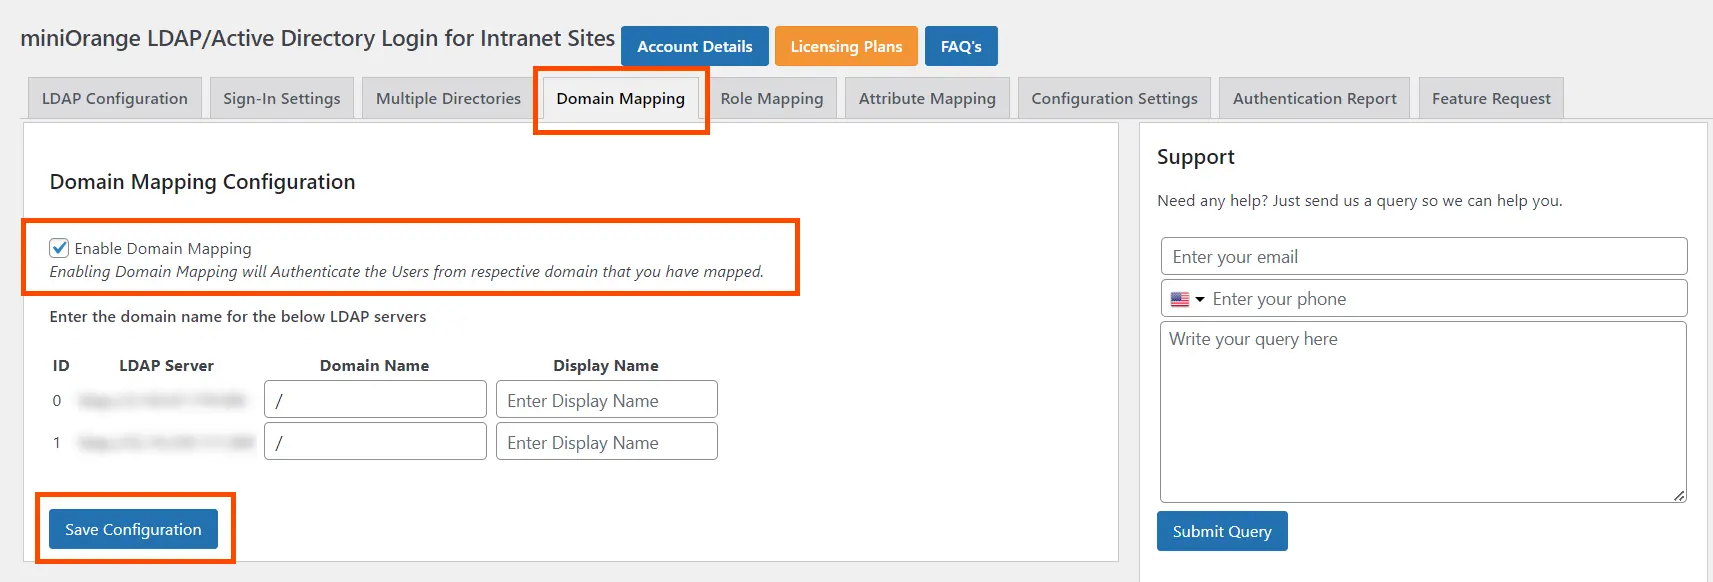 LDAP AD Login for Intranet Add Multiple Directory Domain Mapping Configuration